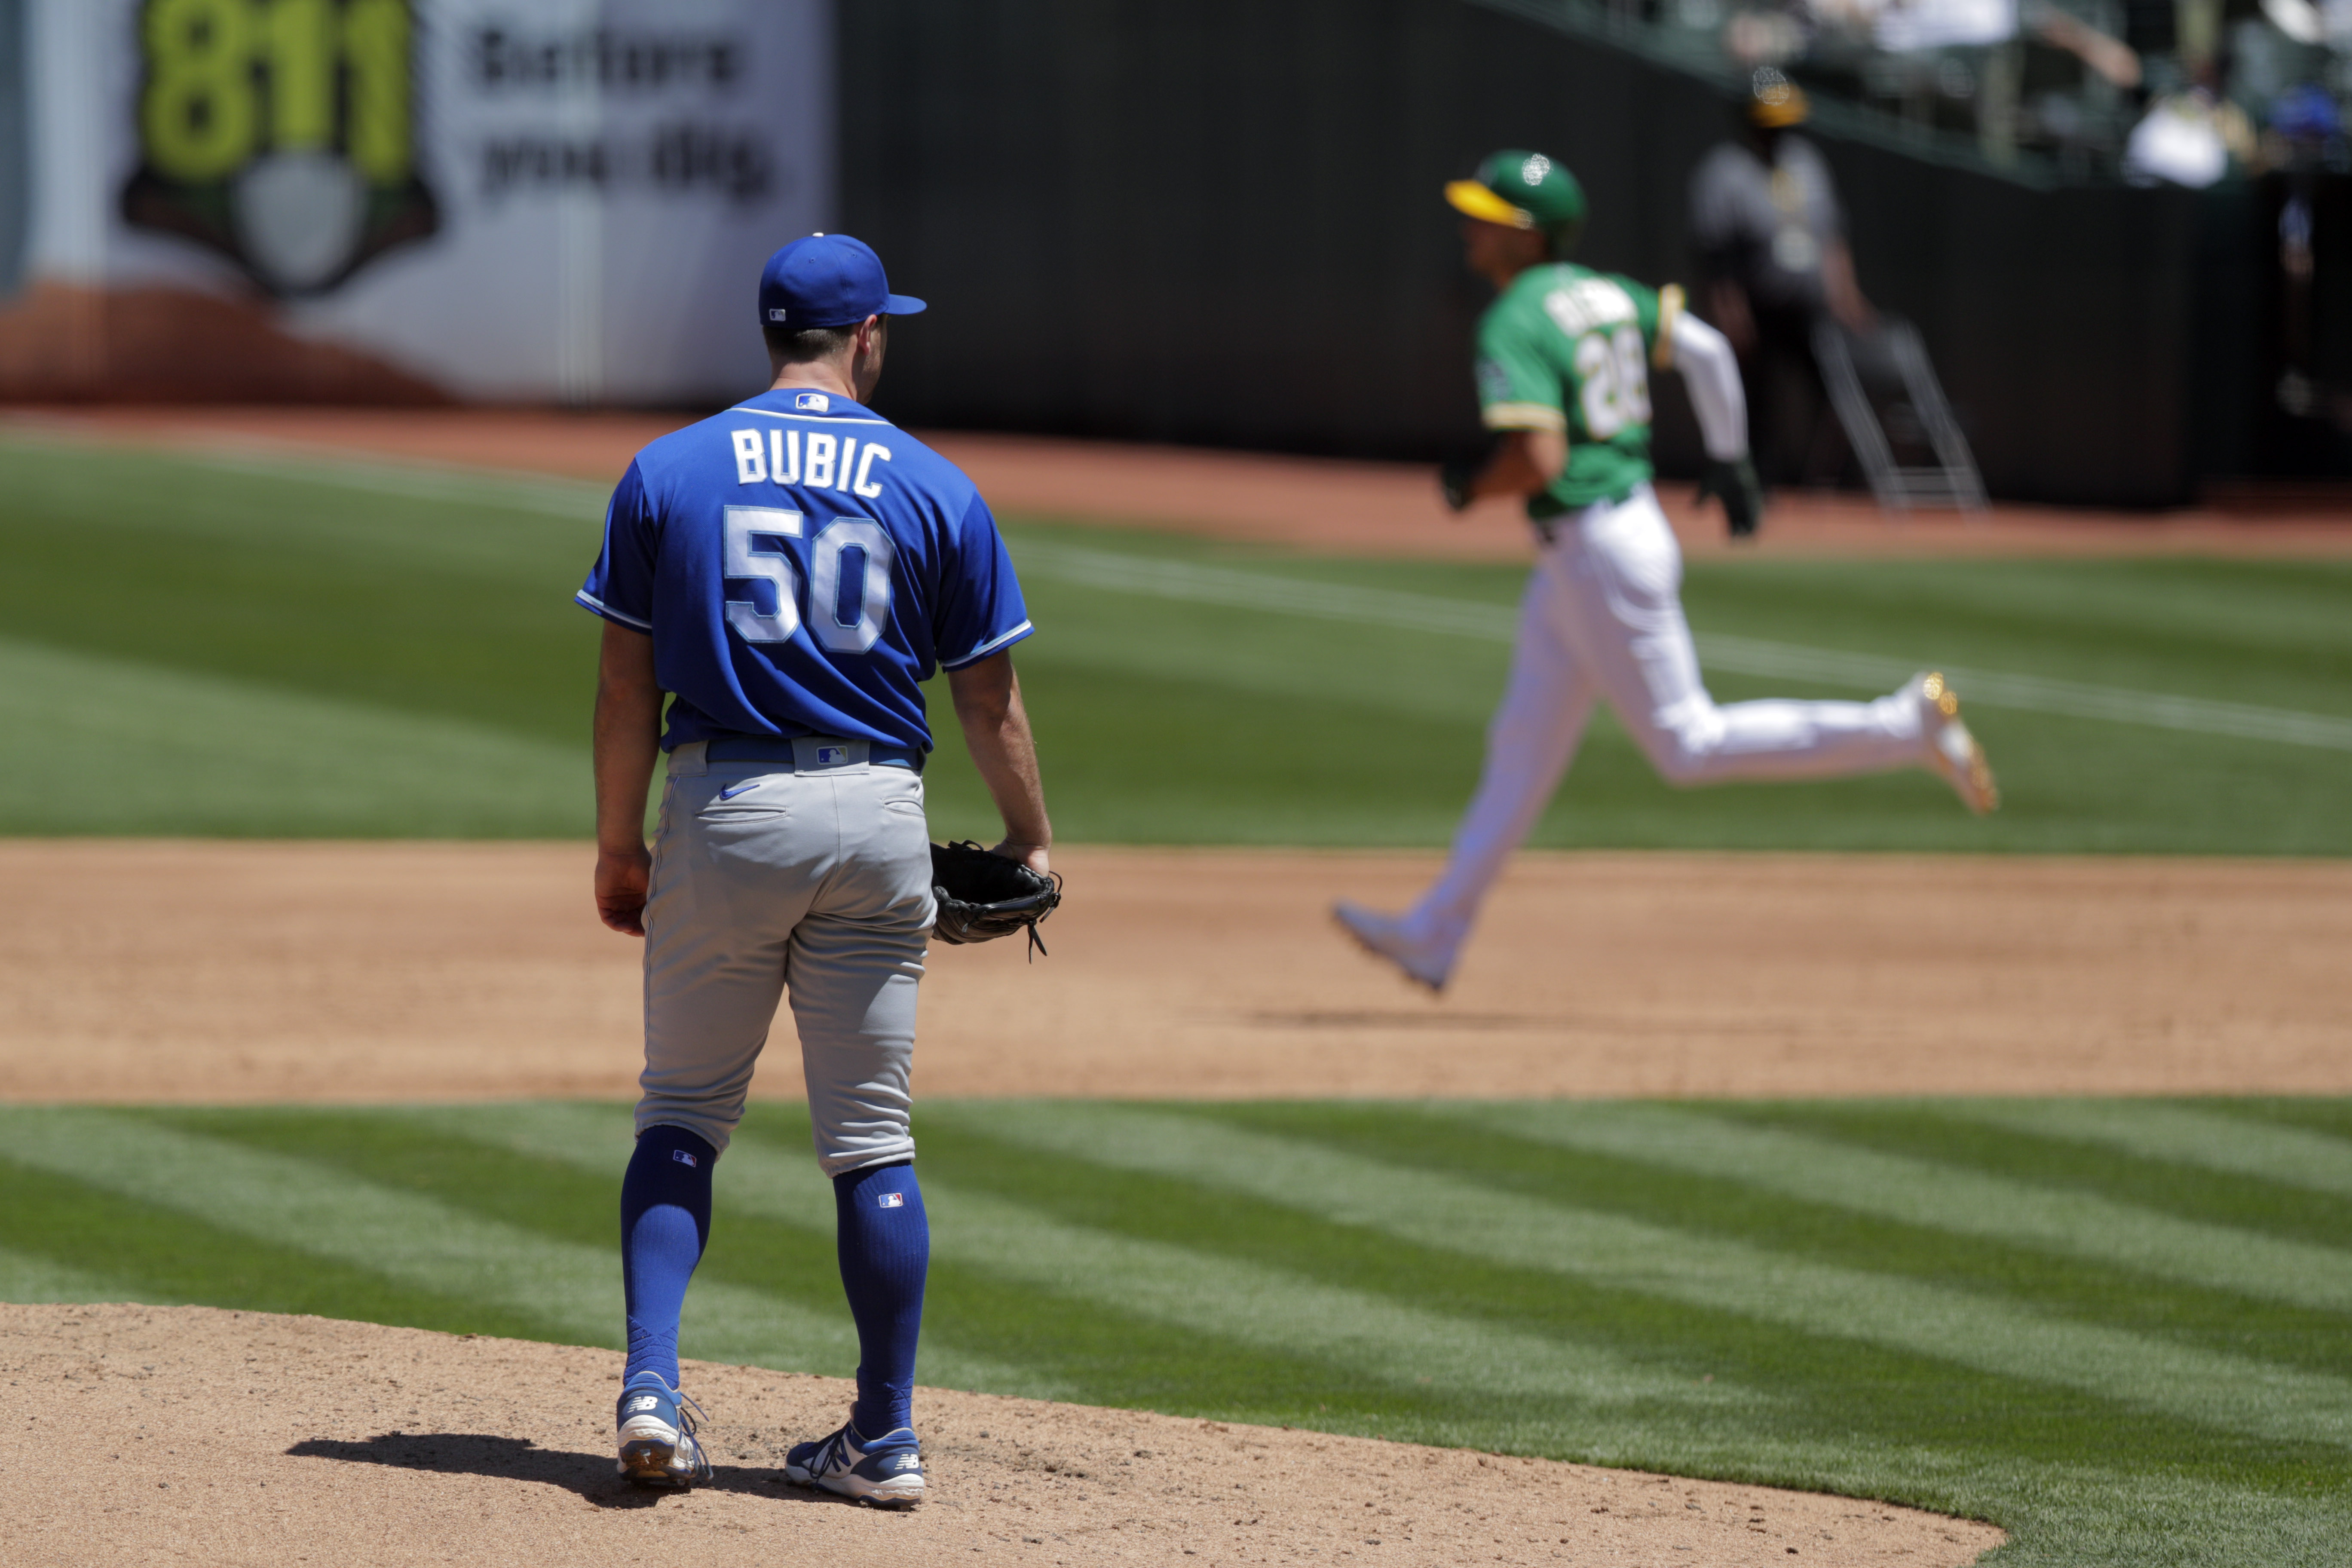 Kris Bubic (50) back on the mound watching Matt Olson (28) round.the bases after hitting his third inning homerun as the Oakland Athletics played the Kansas City Royals at the Coliseum in Oakland, Calif., on Sunday, June 13, 2021.